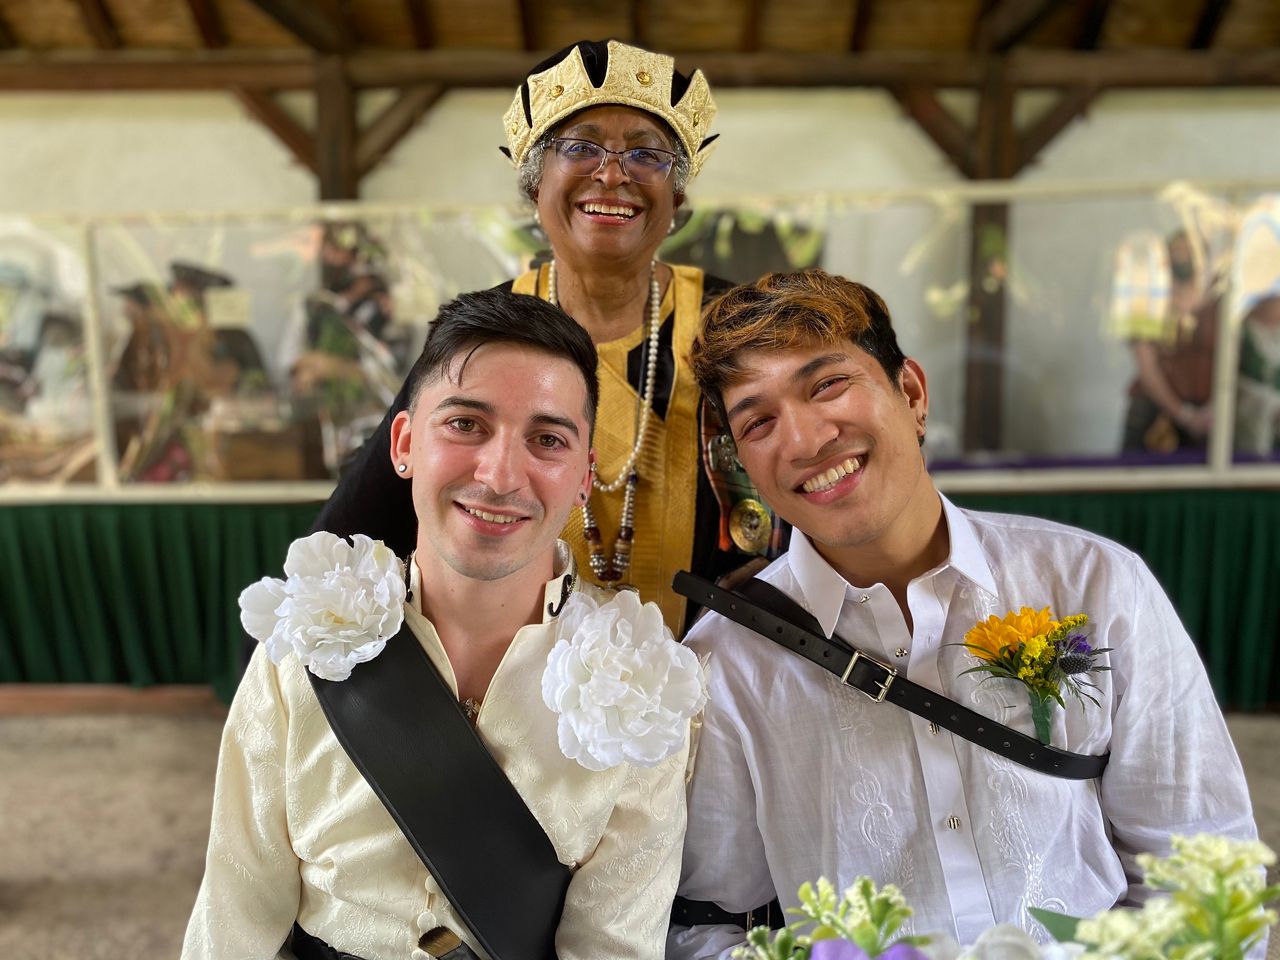 Pictured are newlywed Jonathan Sangel and Corey Robbins. Mesiah married the couple at the Scarborough Renaissance Festival on May 15, 2021. (Credit, Lupe Zapata)